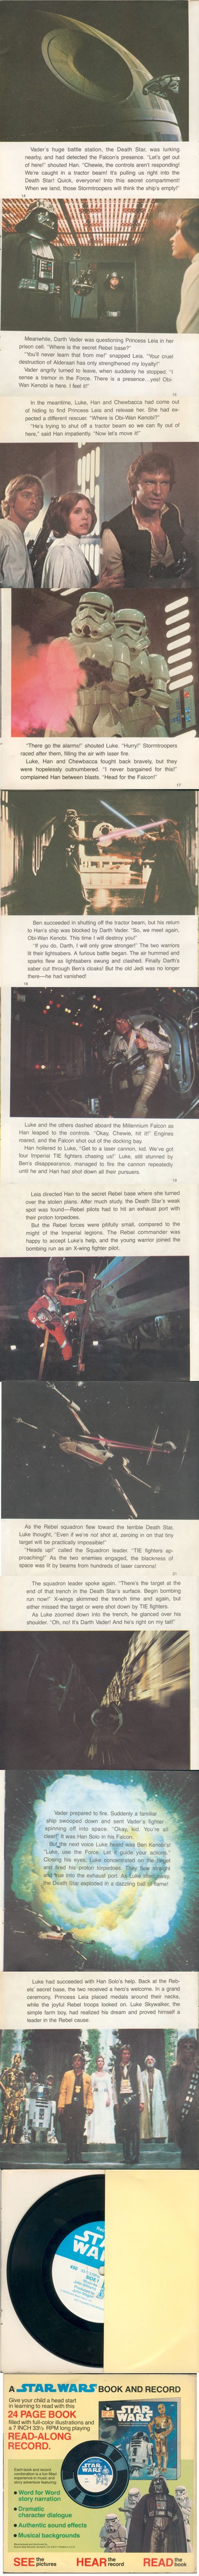 star_wars_story_book_part_2